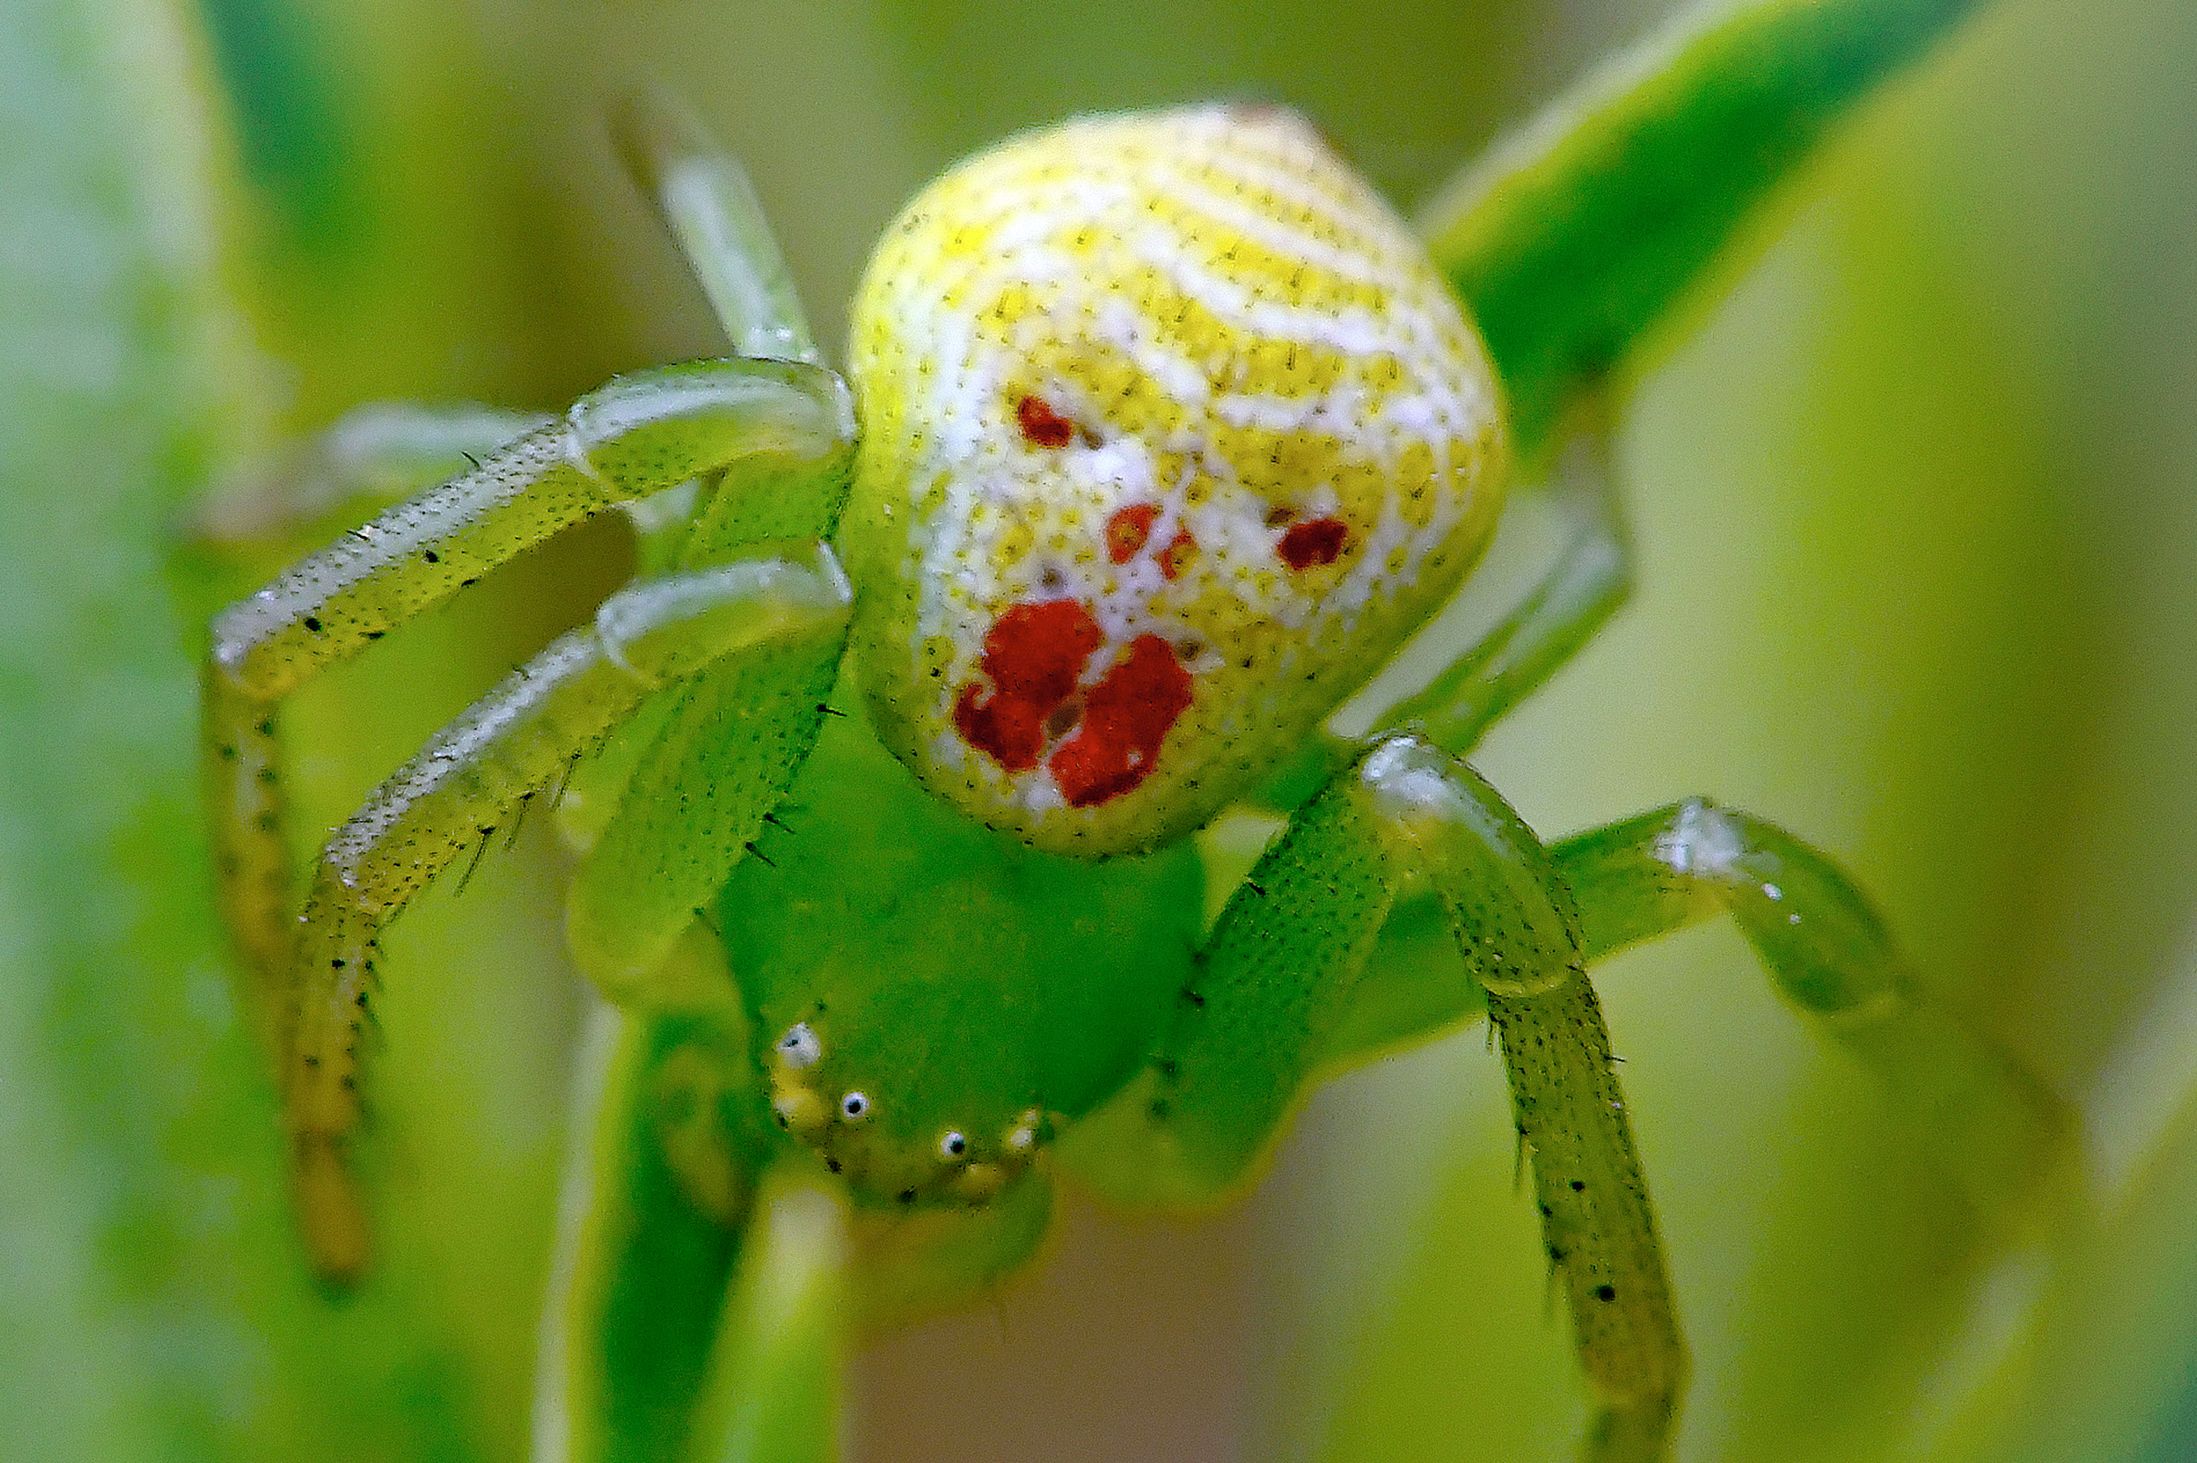 A bright green clown face spider bears a startling resemblance to ...